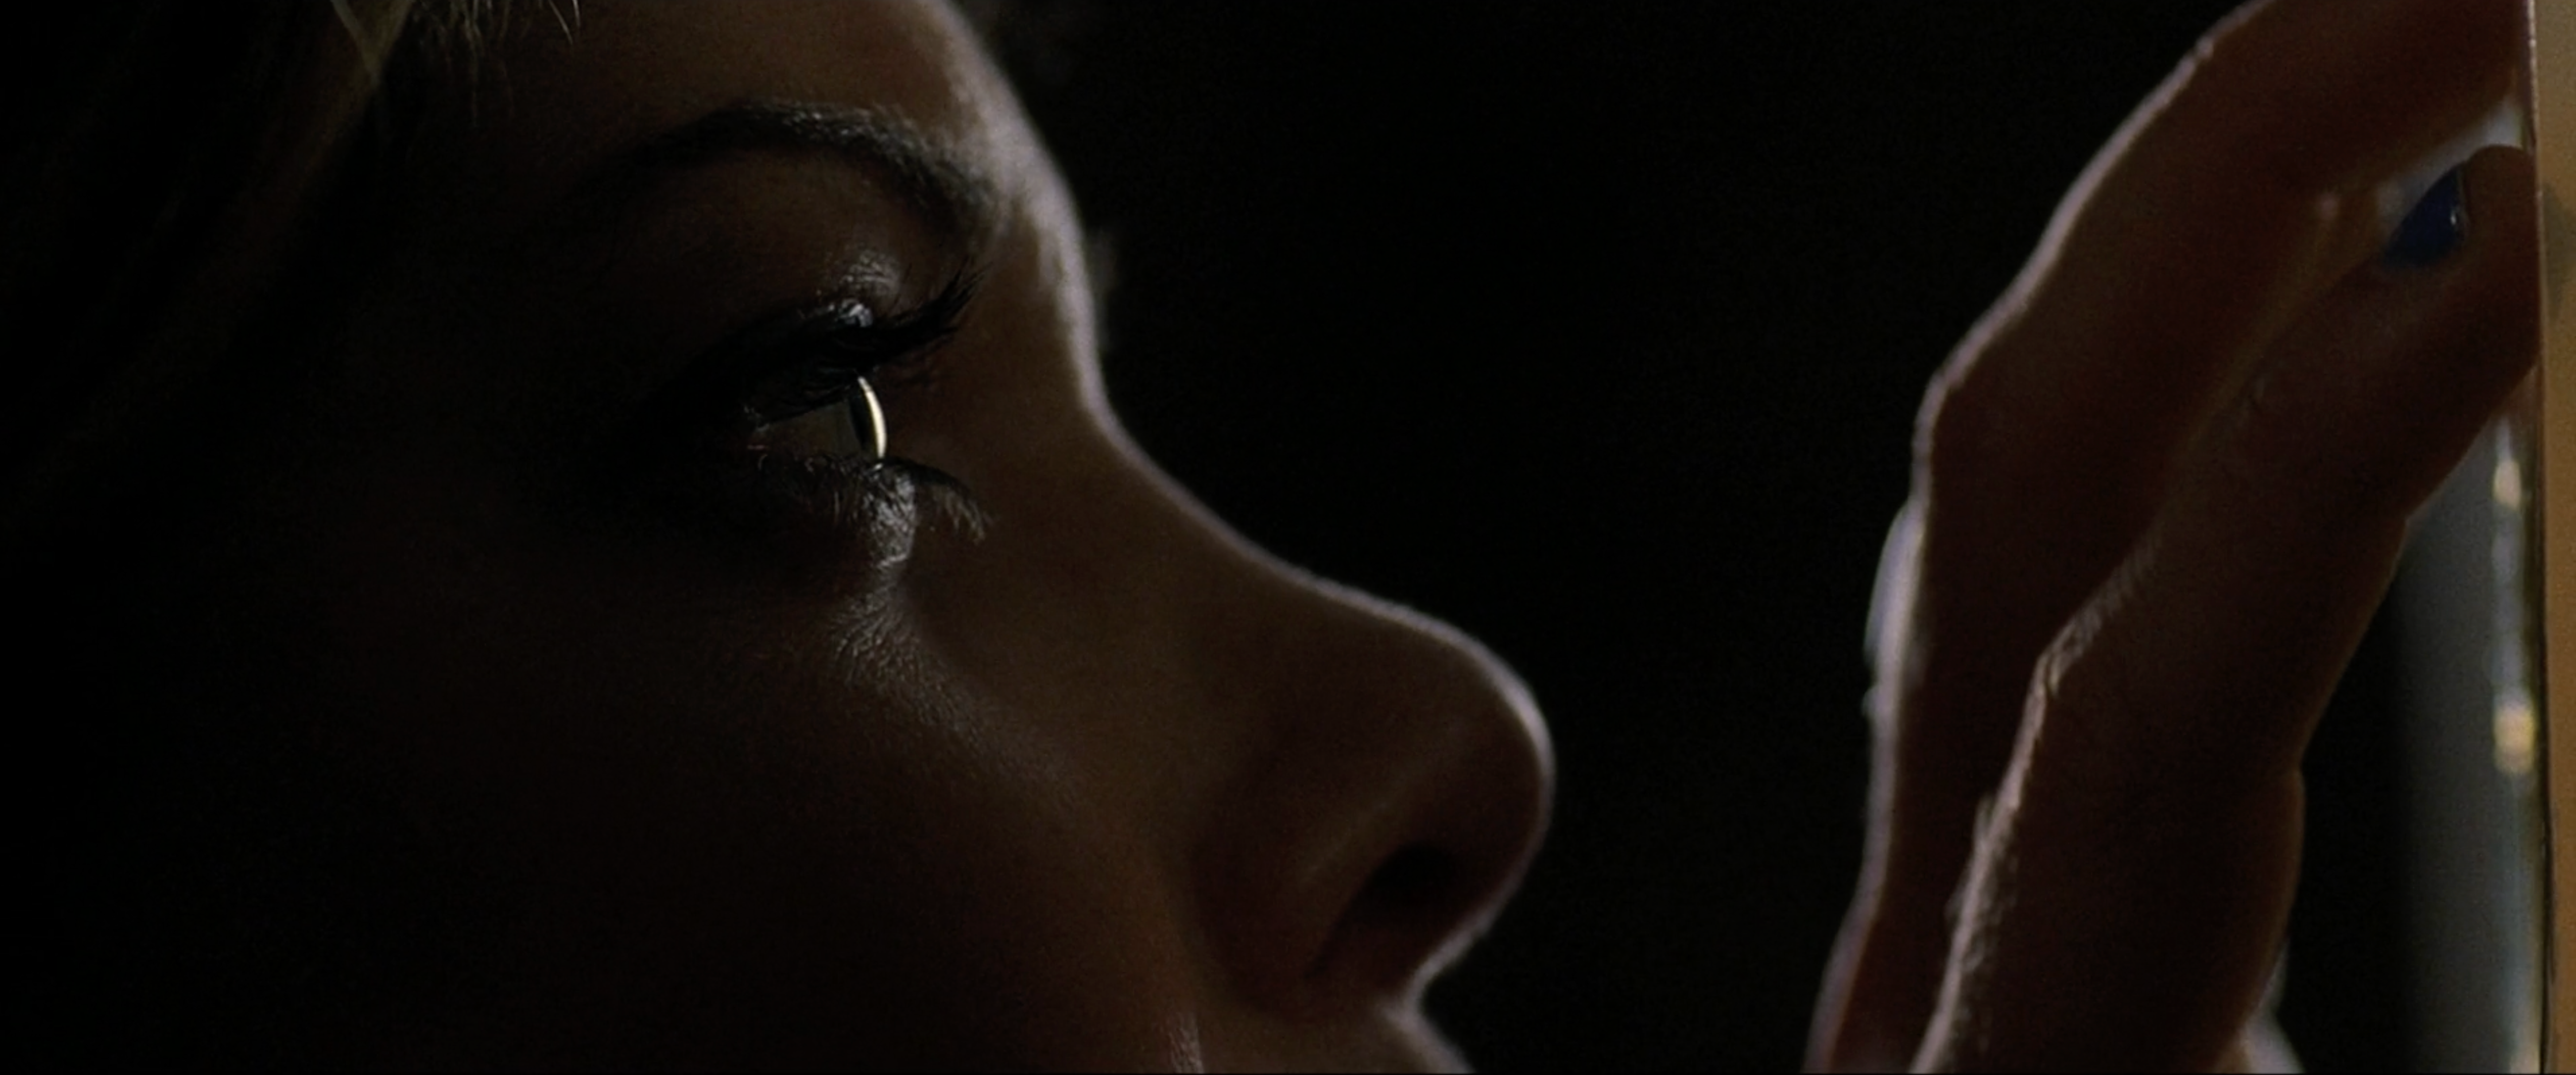 Cinematography by Rose Fadem-Johnson